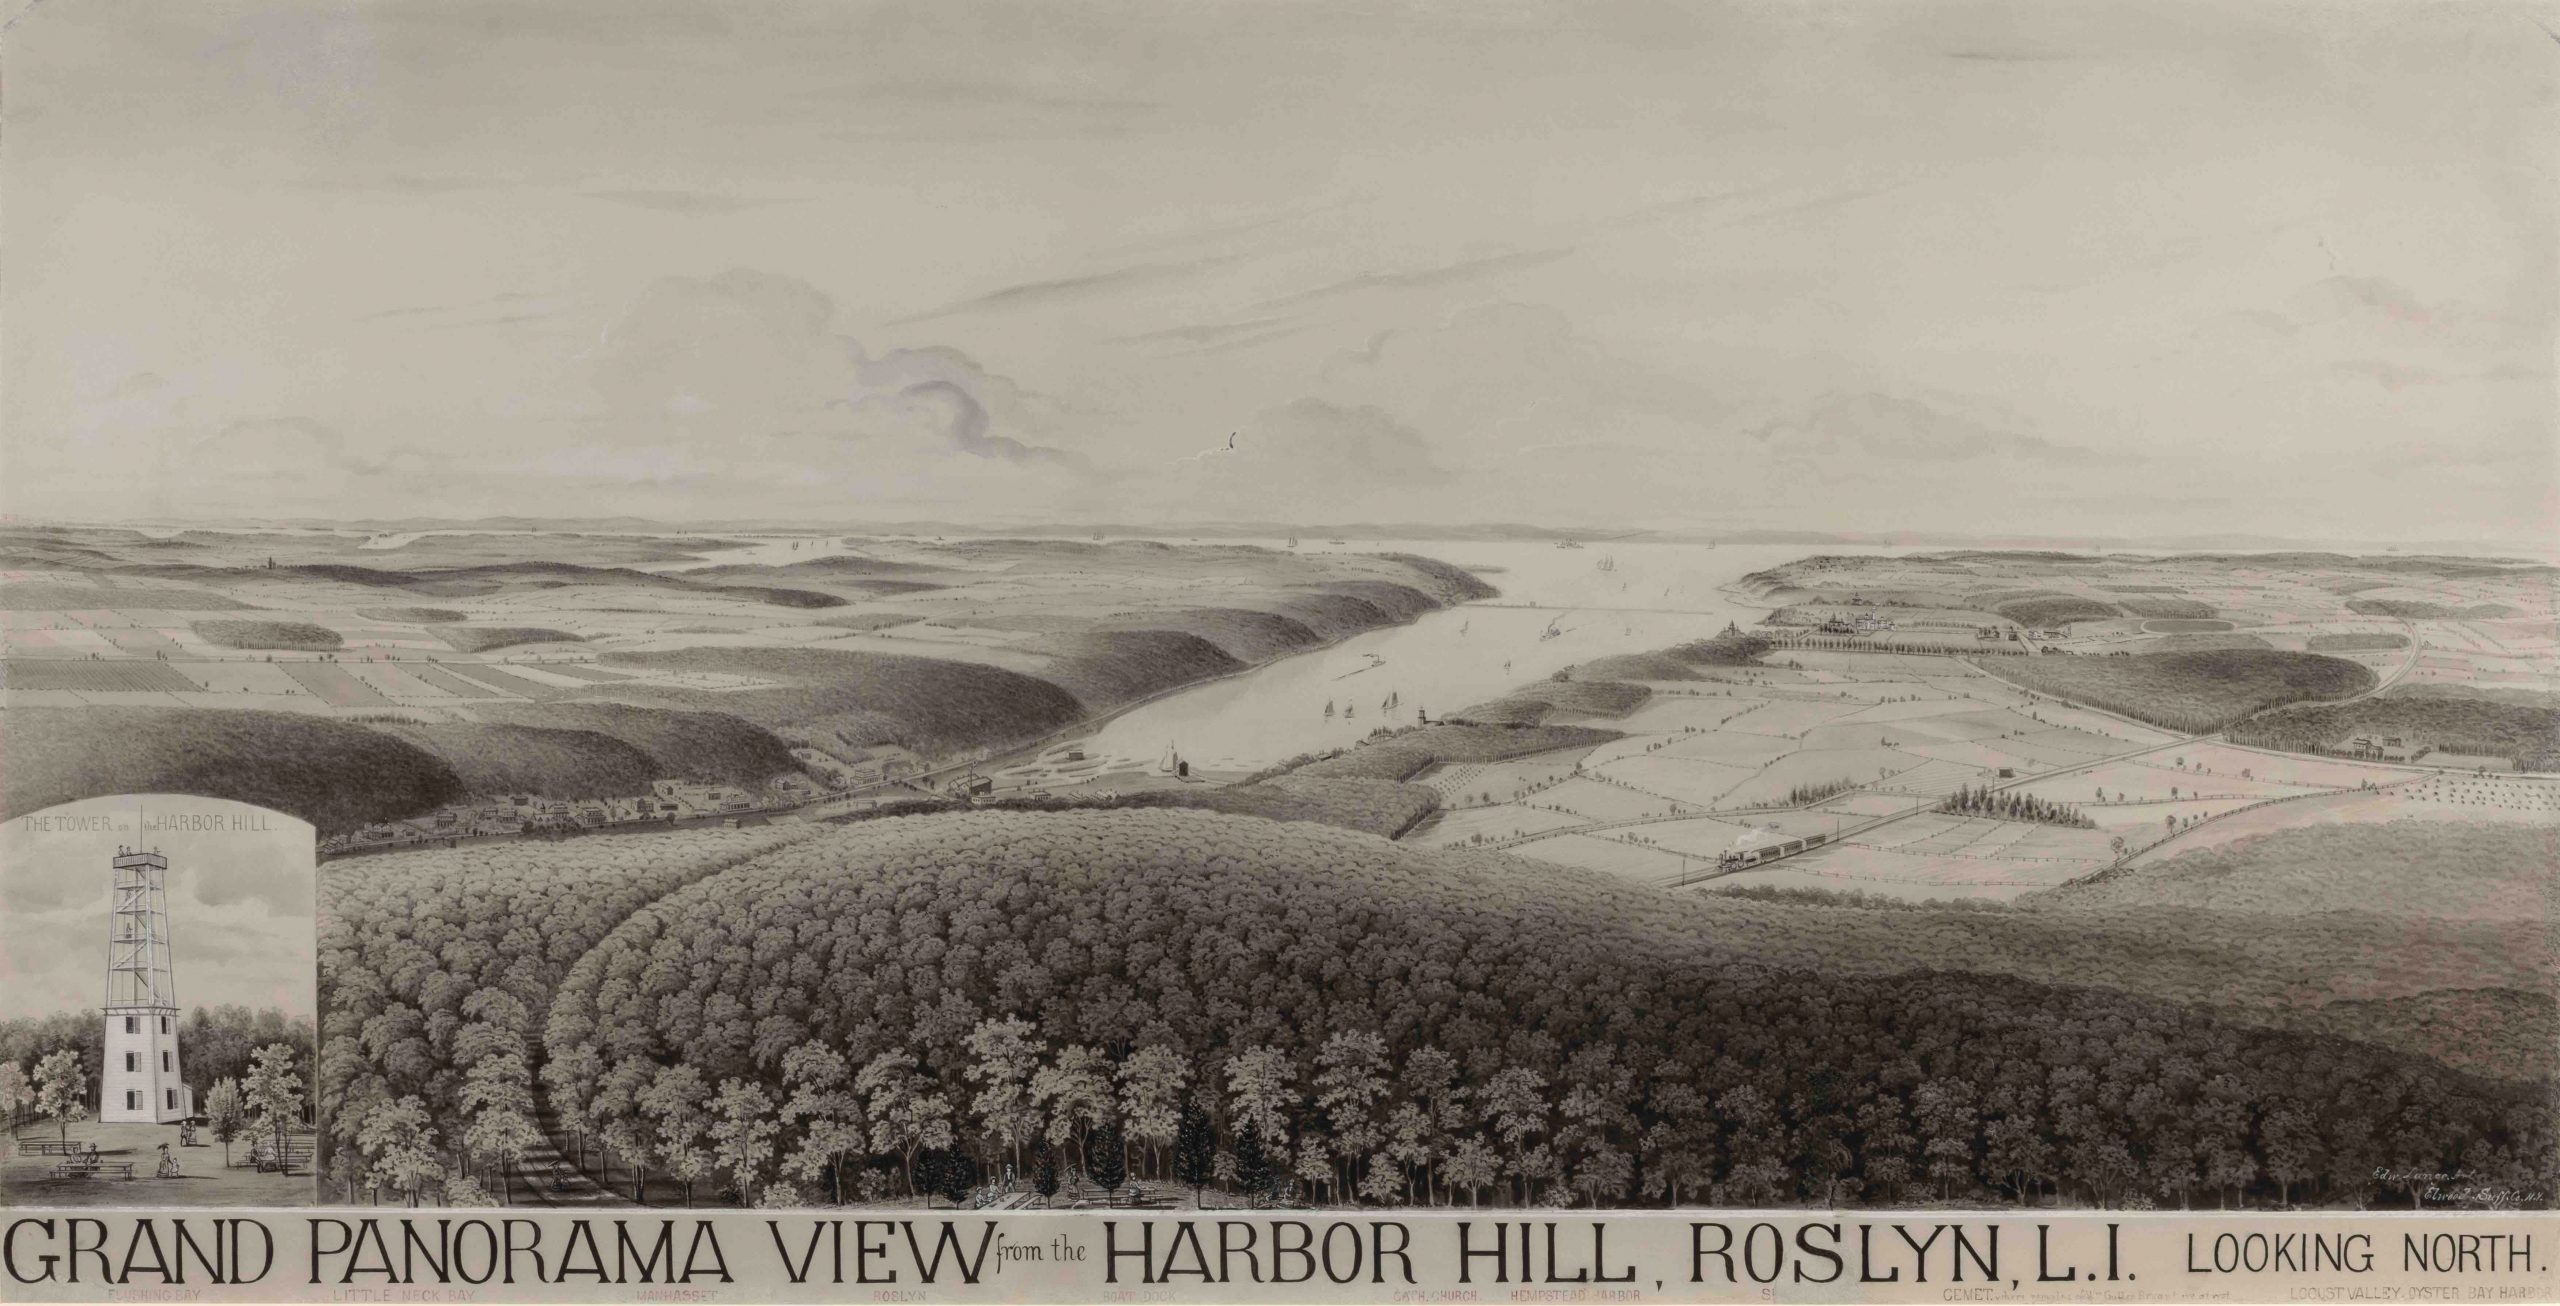 Grand-Panorama-View-from-the-Harbor-Hill-Roslyn-L.I.-Looking-North-Preservation-Long-Island-1996.3.1_cropped-scaled.jpg